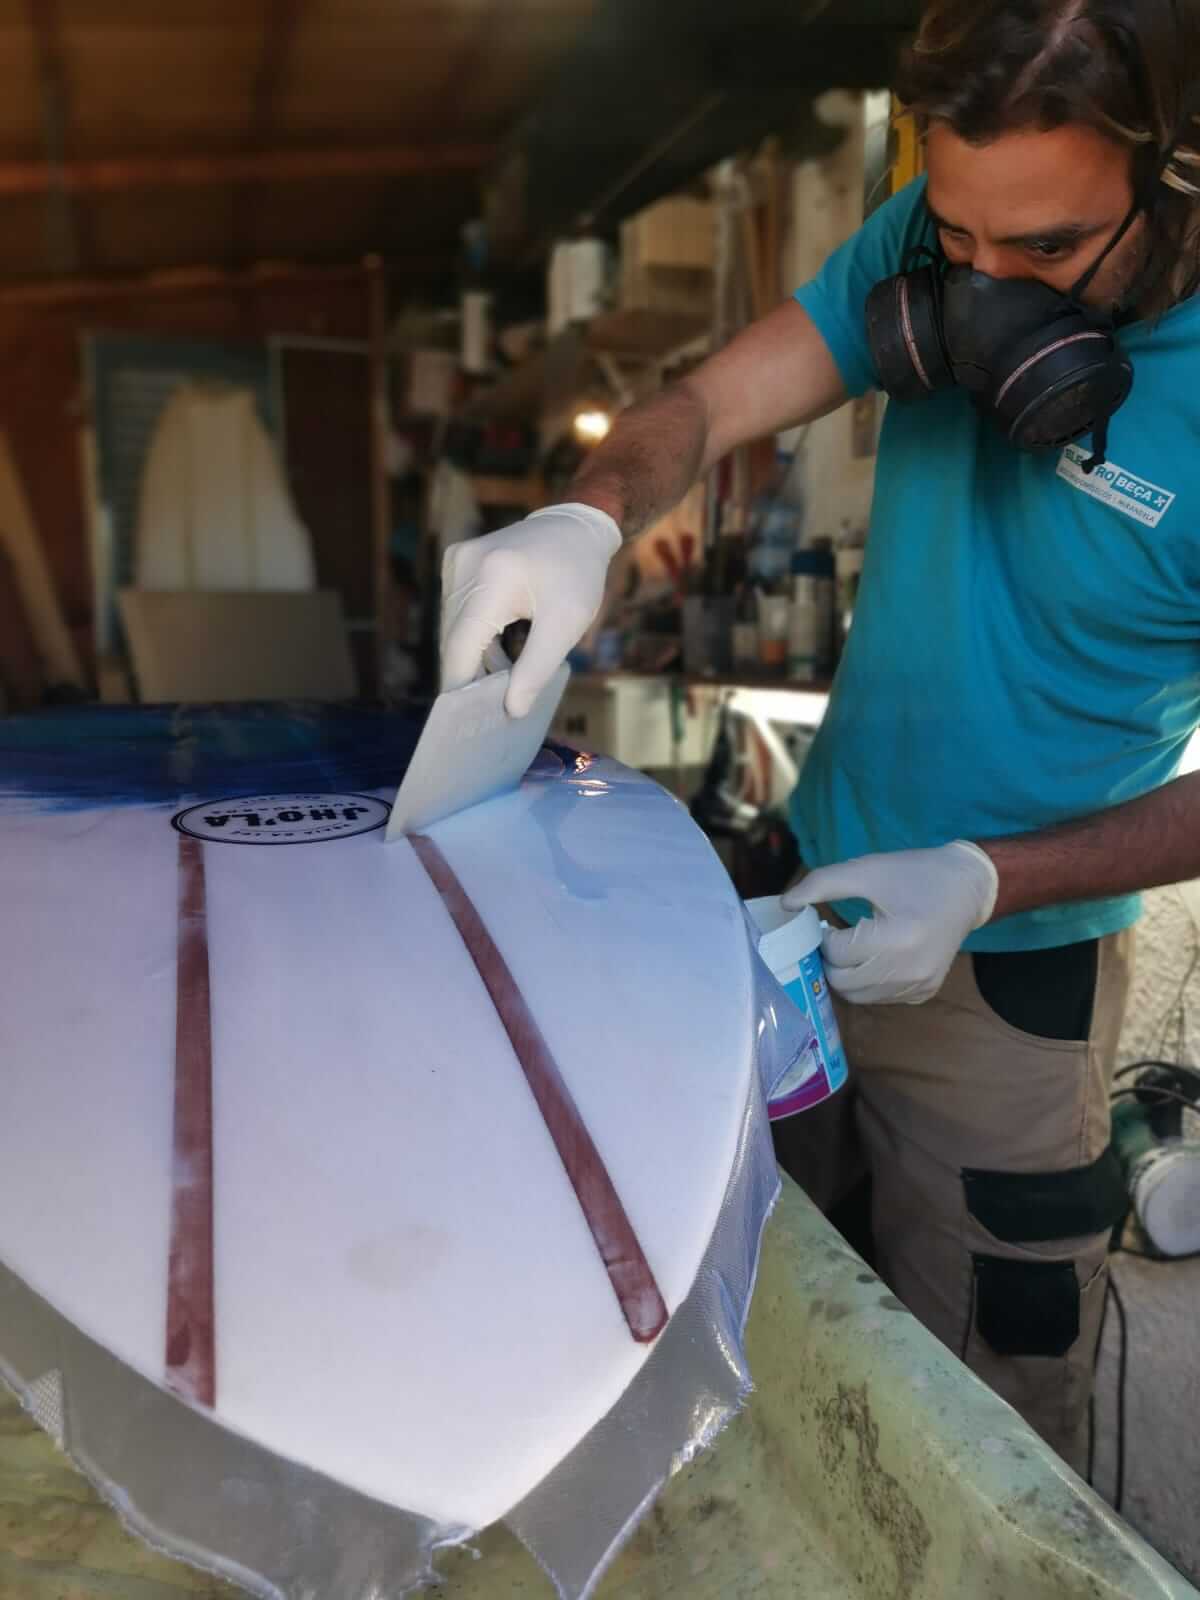 Shaping surfboards